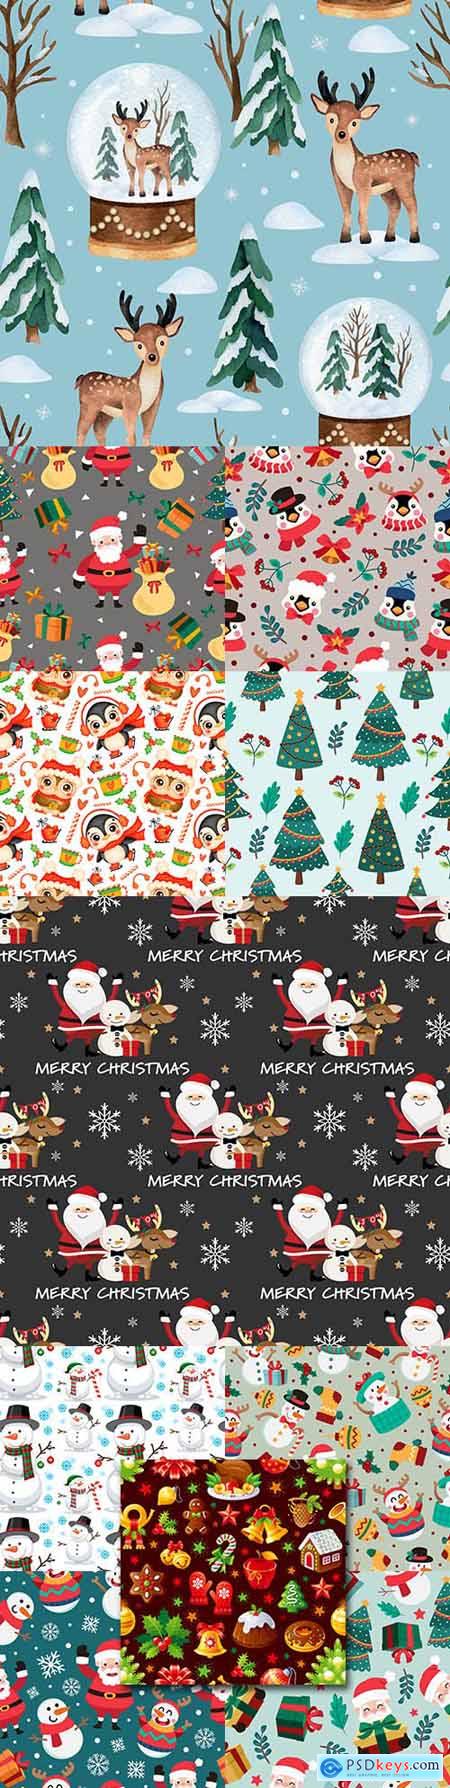 Christmas cartoon seamless patterns with Santa Claus and snowman